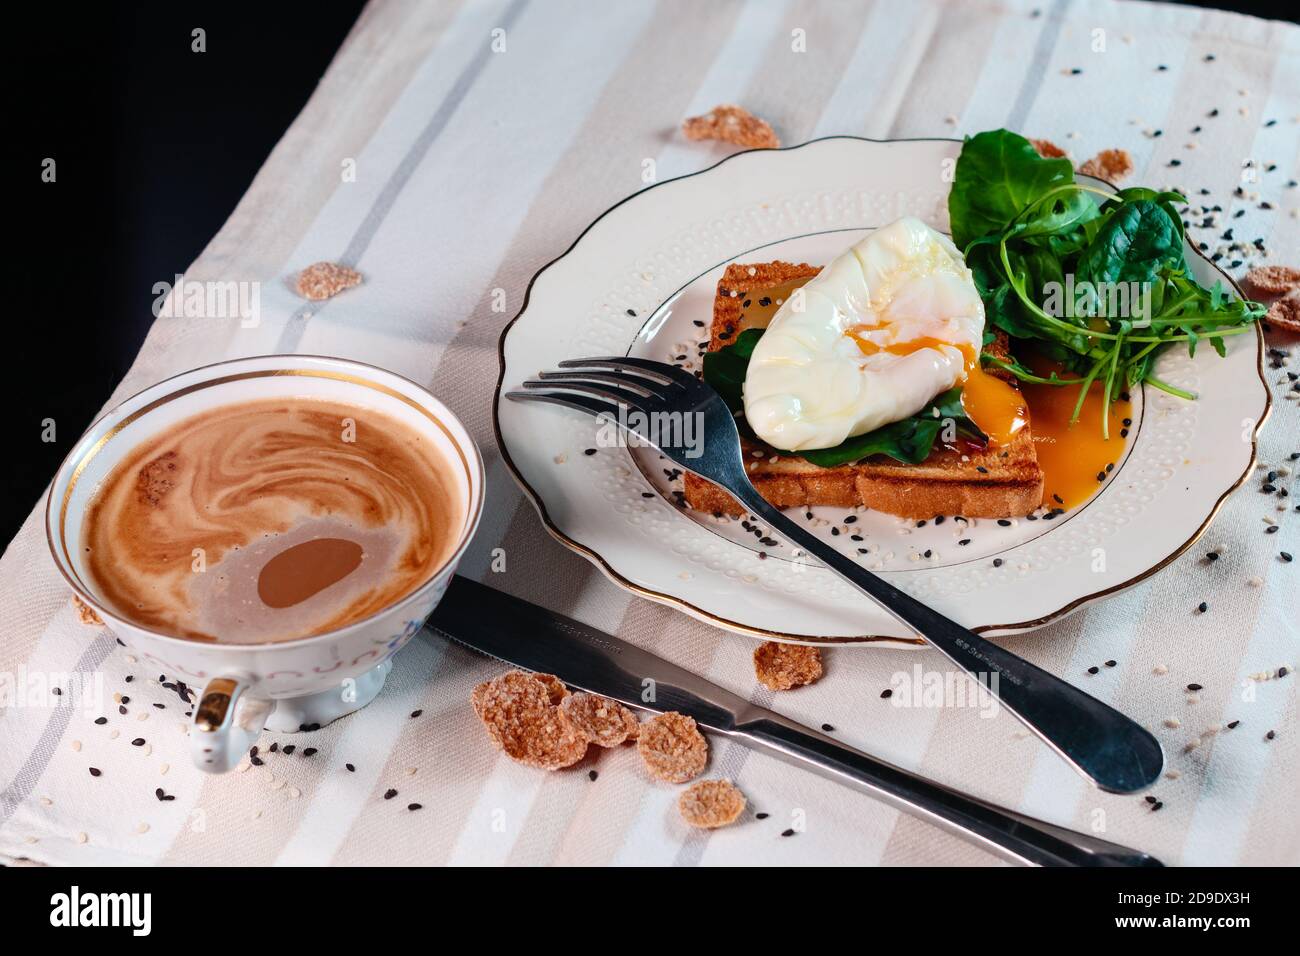 Healthy breakfast with poached egg on toast with green salad leaves. Egg yolk spread Stock Photo